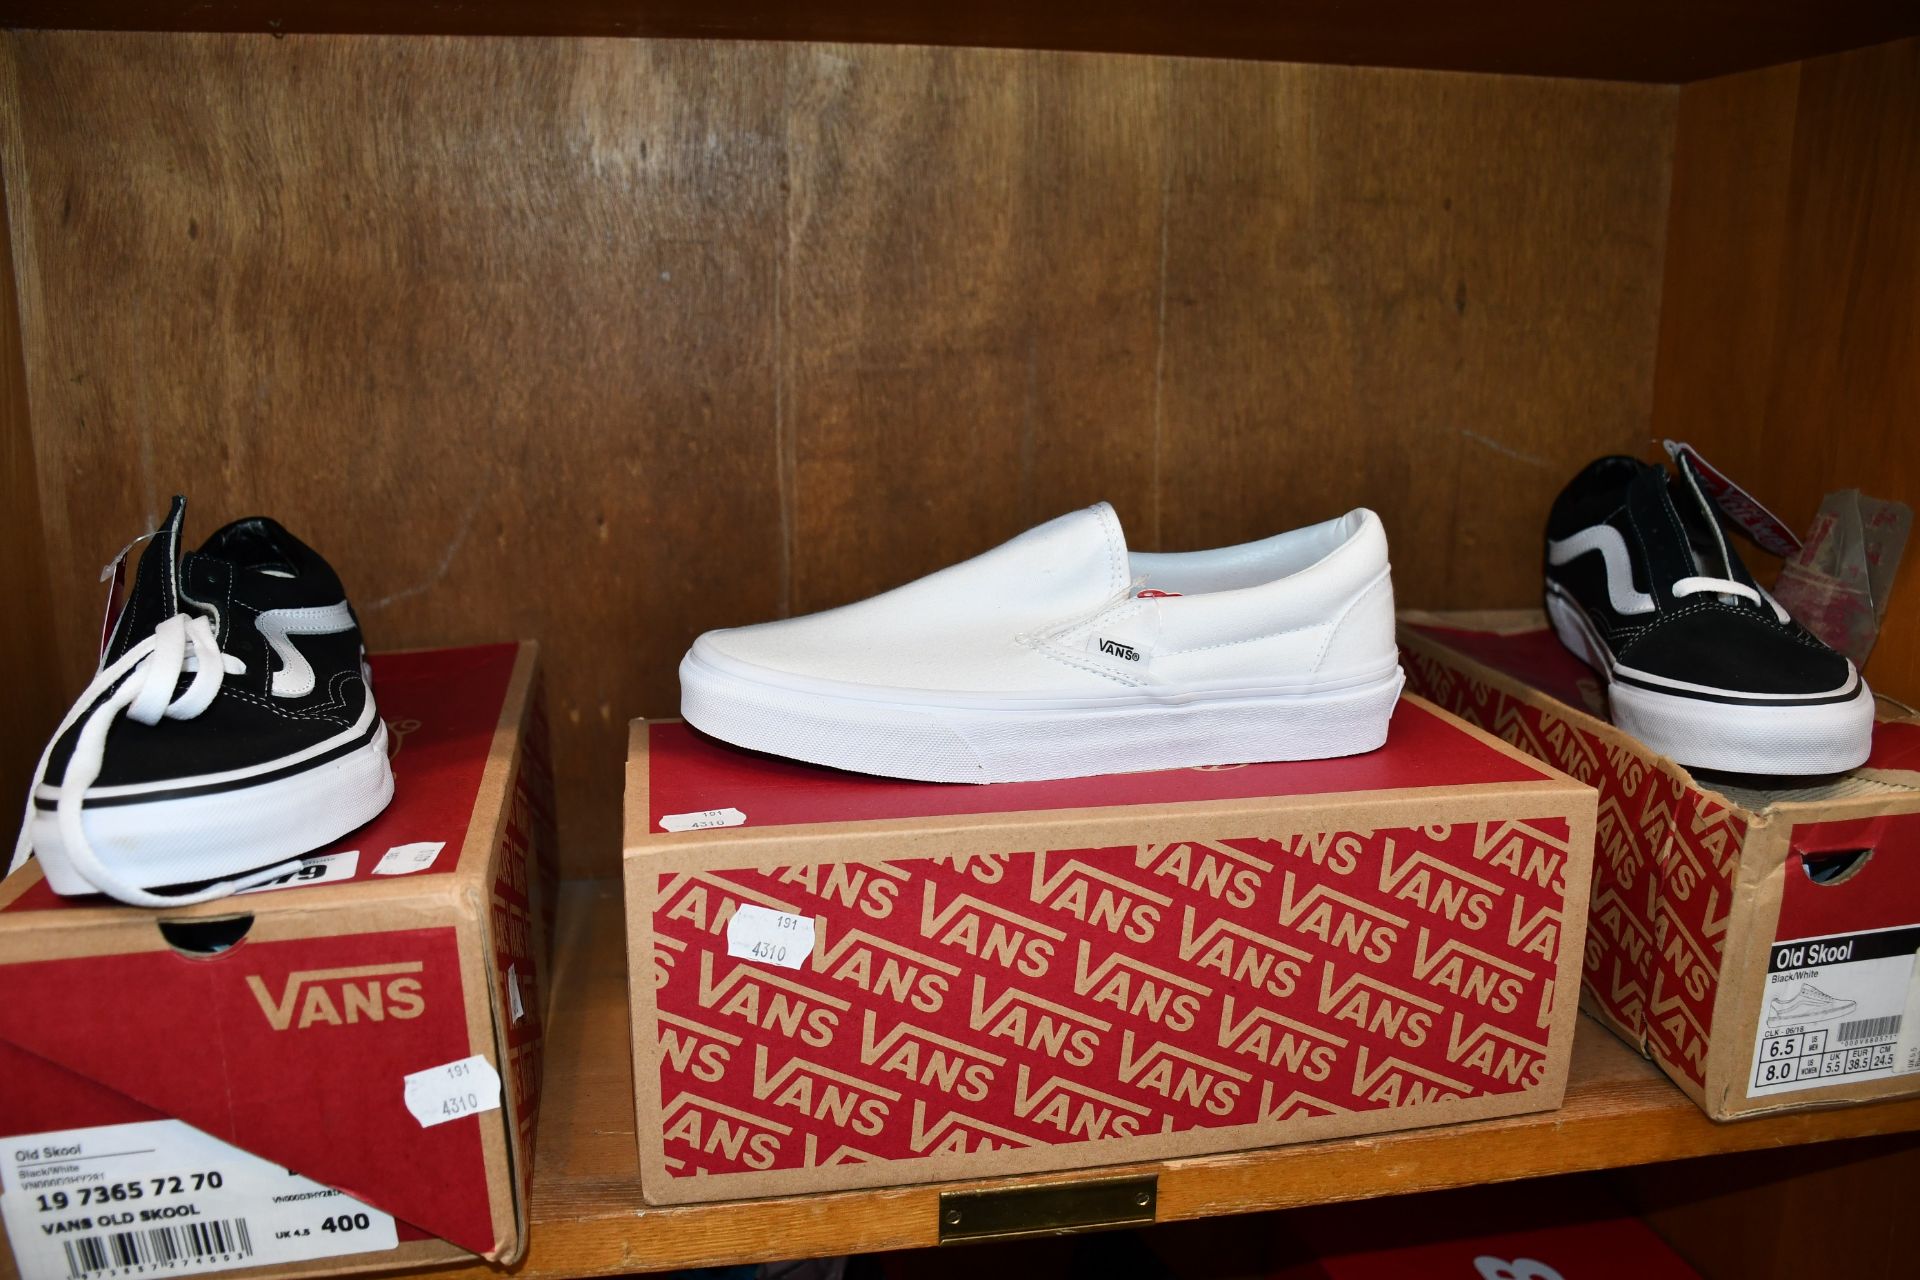 Two pairs of Vans Old Skool shoes (UK 4.5 and 5.5) together with a pair of Vans Classic slip-on's (